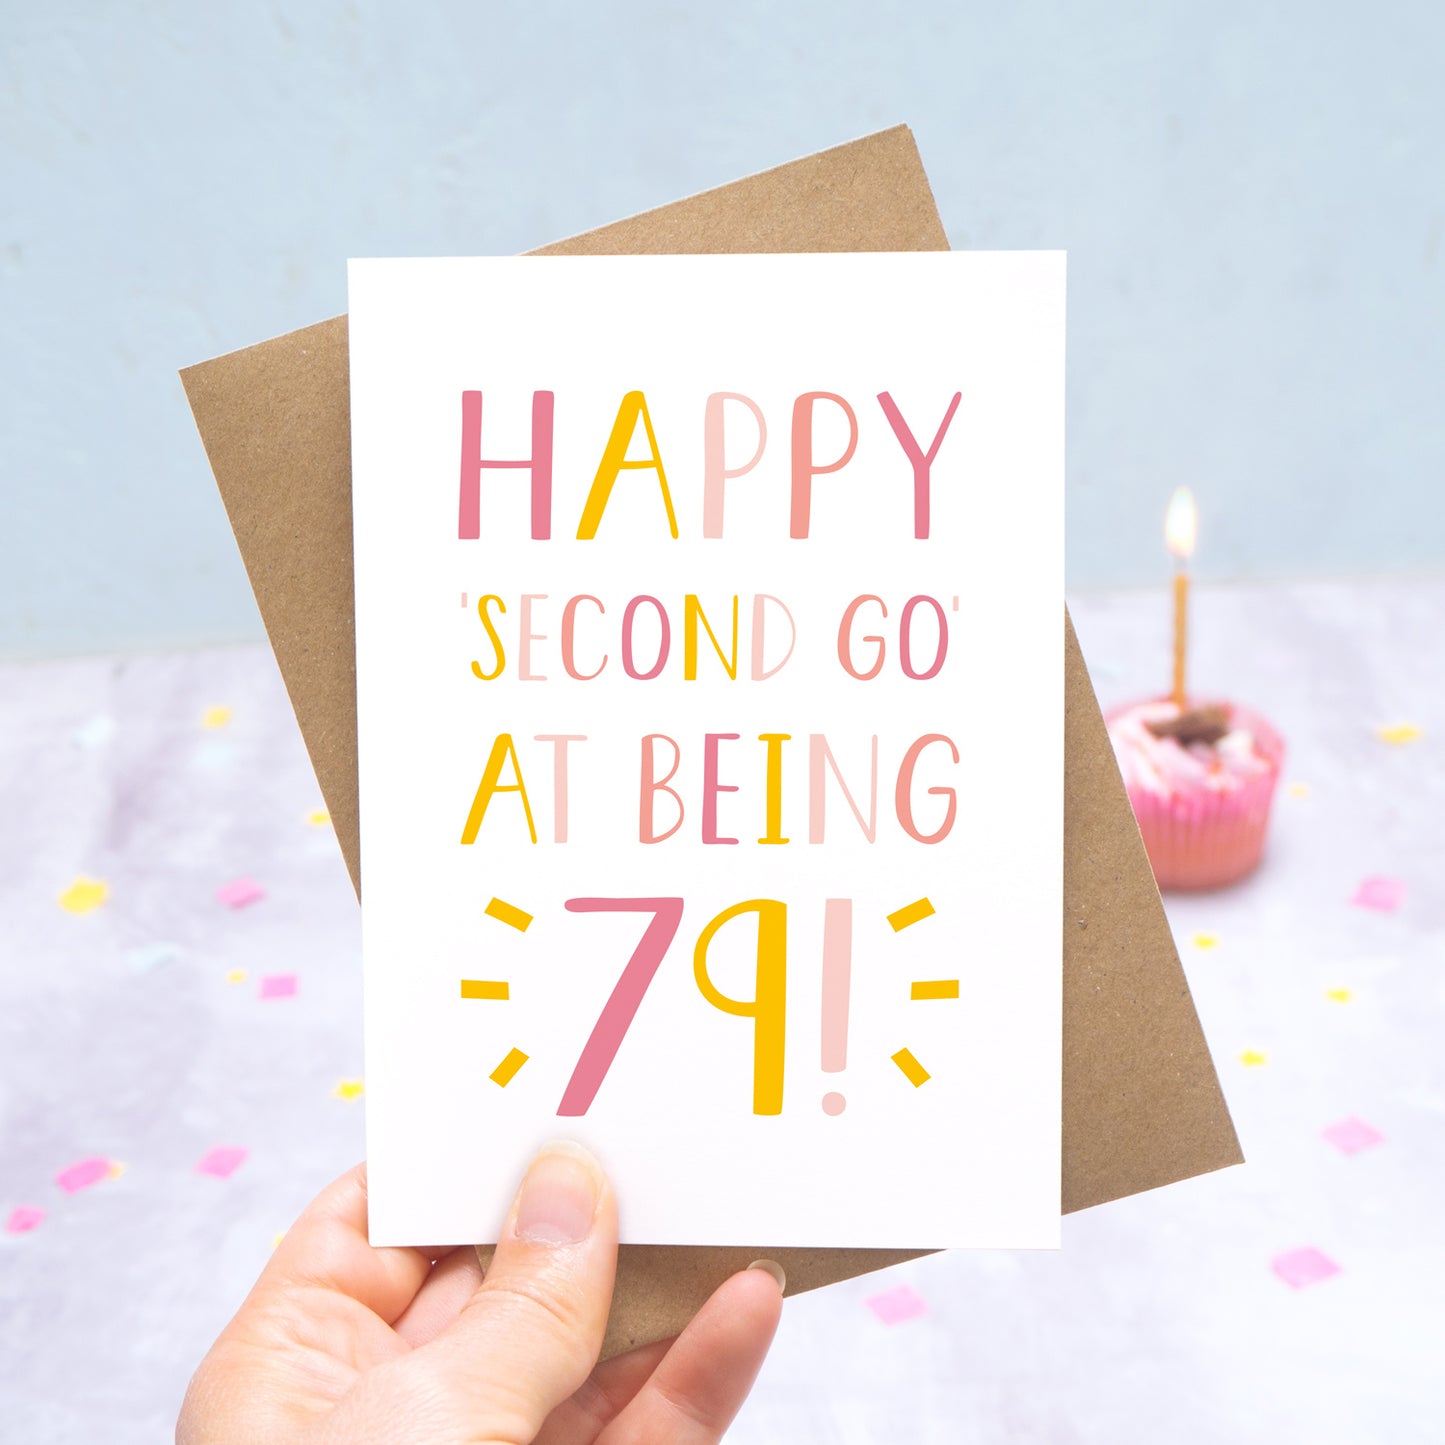 Happy second go at being 79 - milestone age card in pink photographed on a grey and blue background with a cupcake and burning candle.